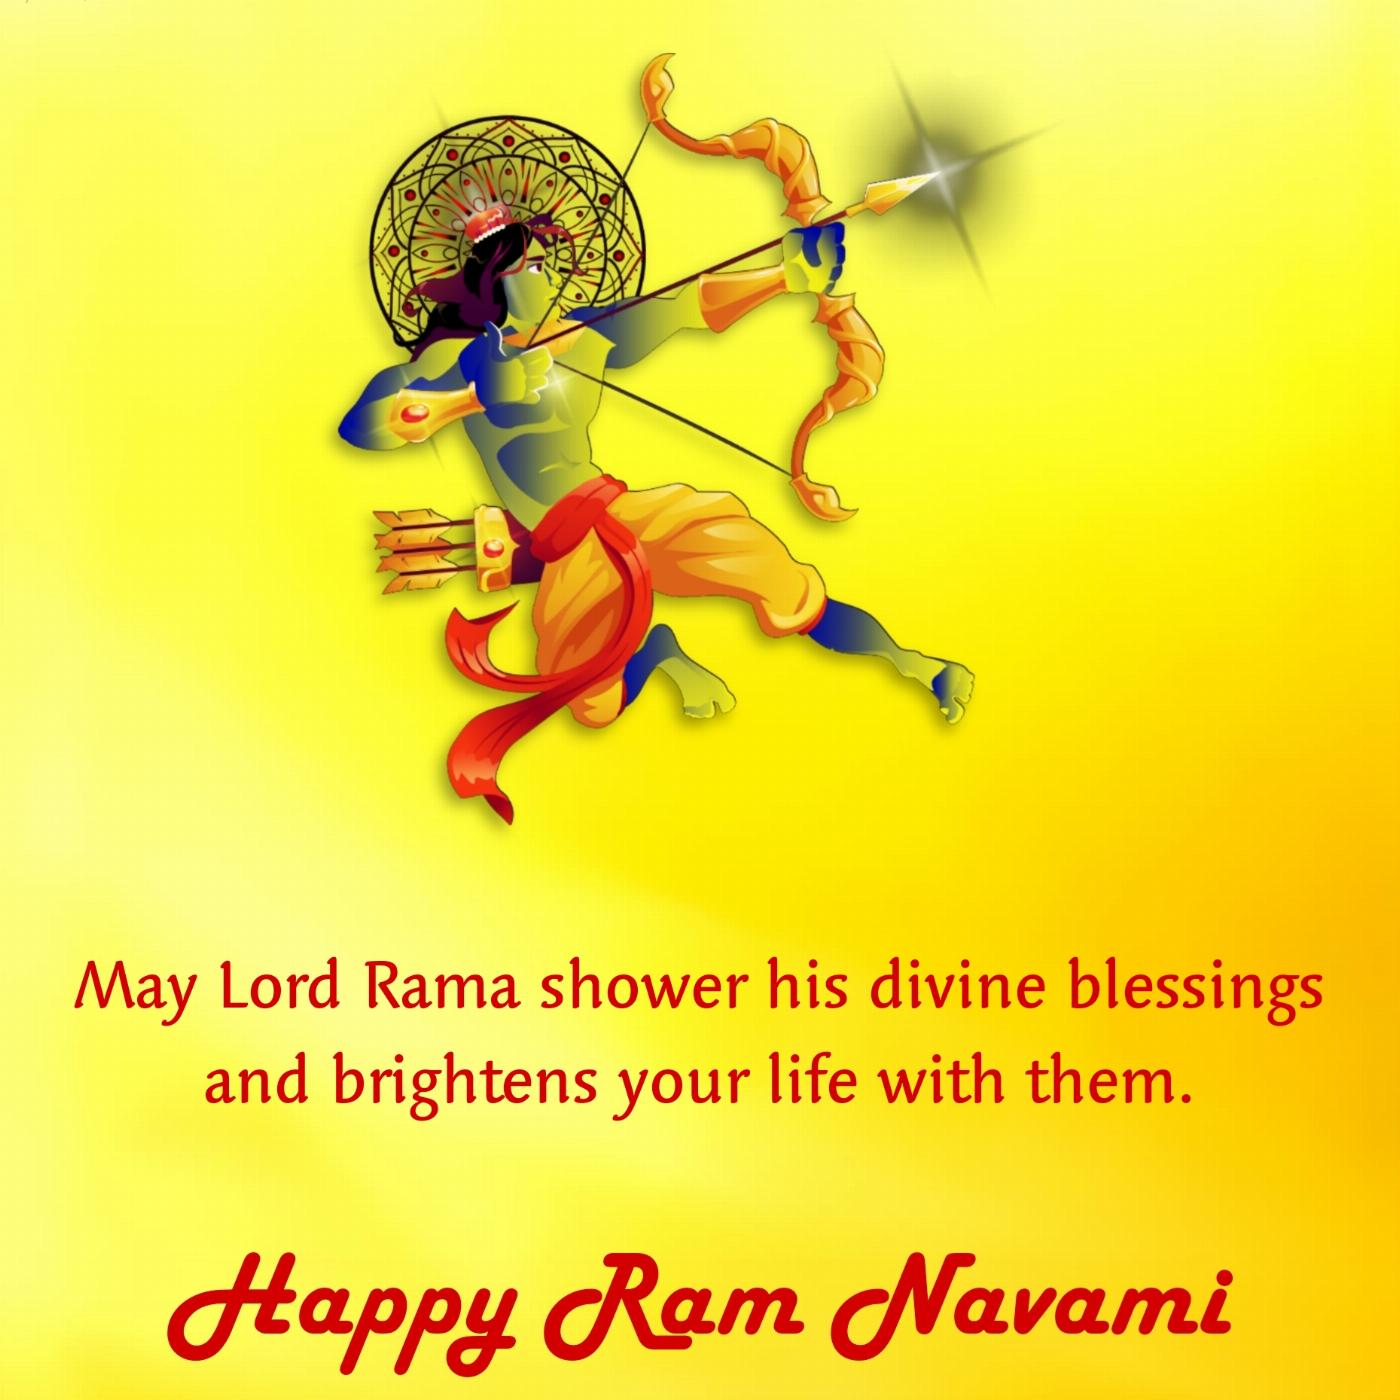 May Lord Rama shower his divine blessings